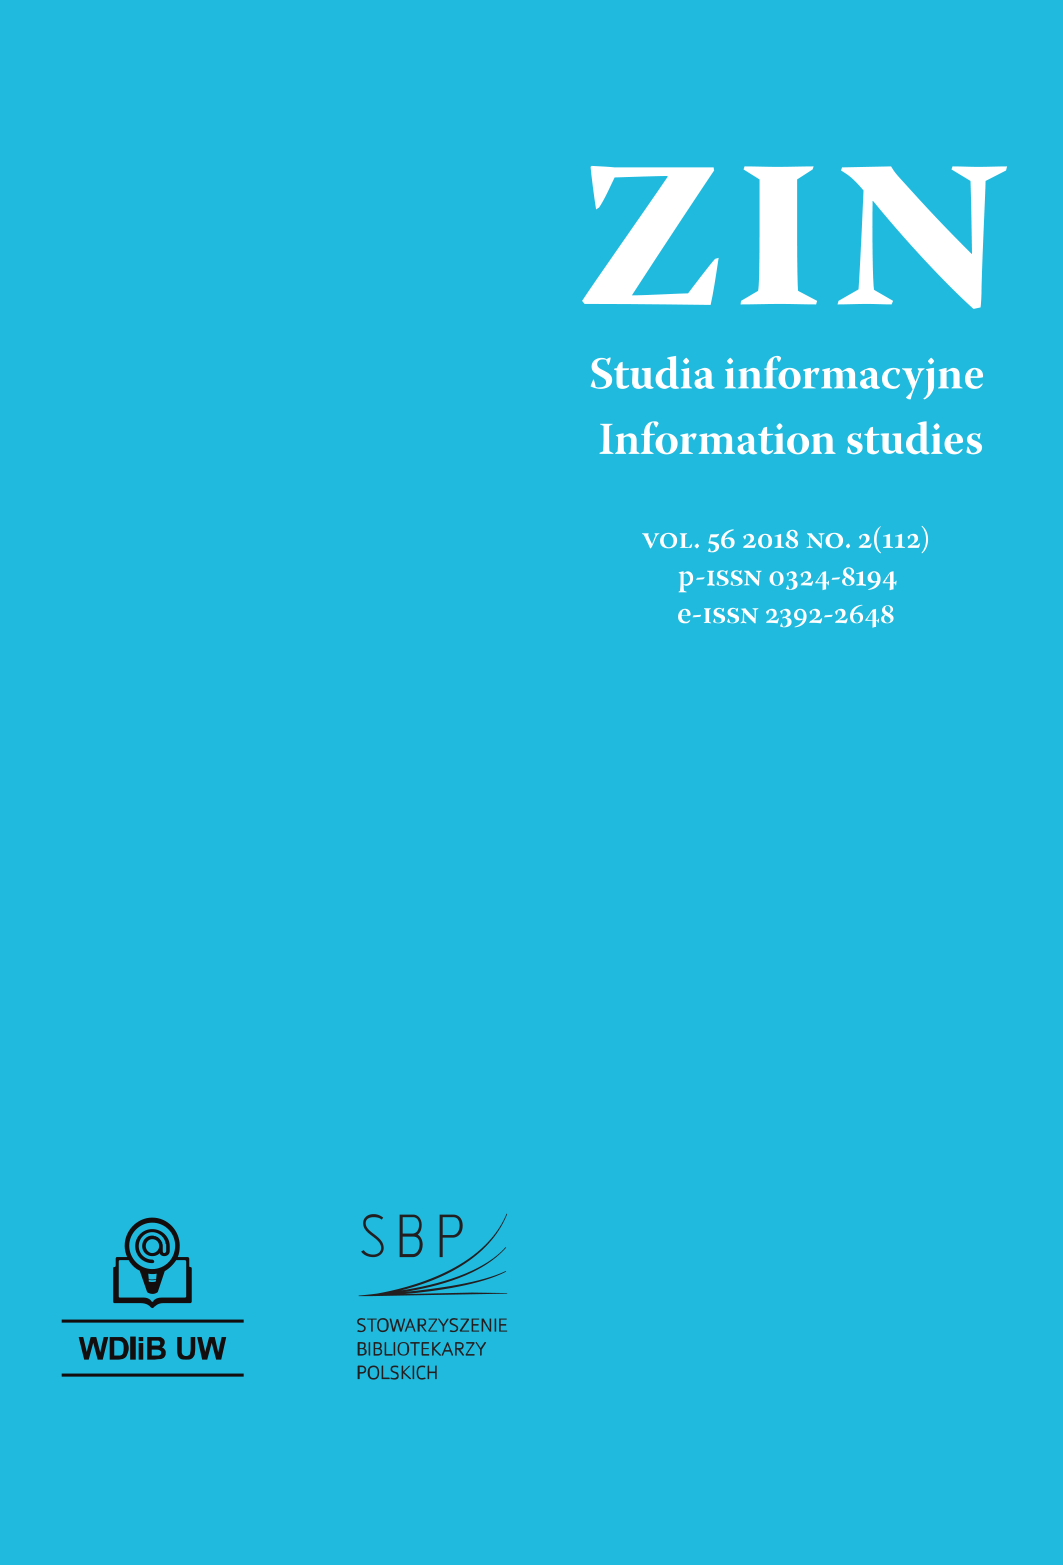 Issues of Information Science - Information Studies